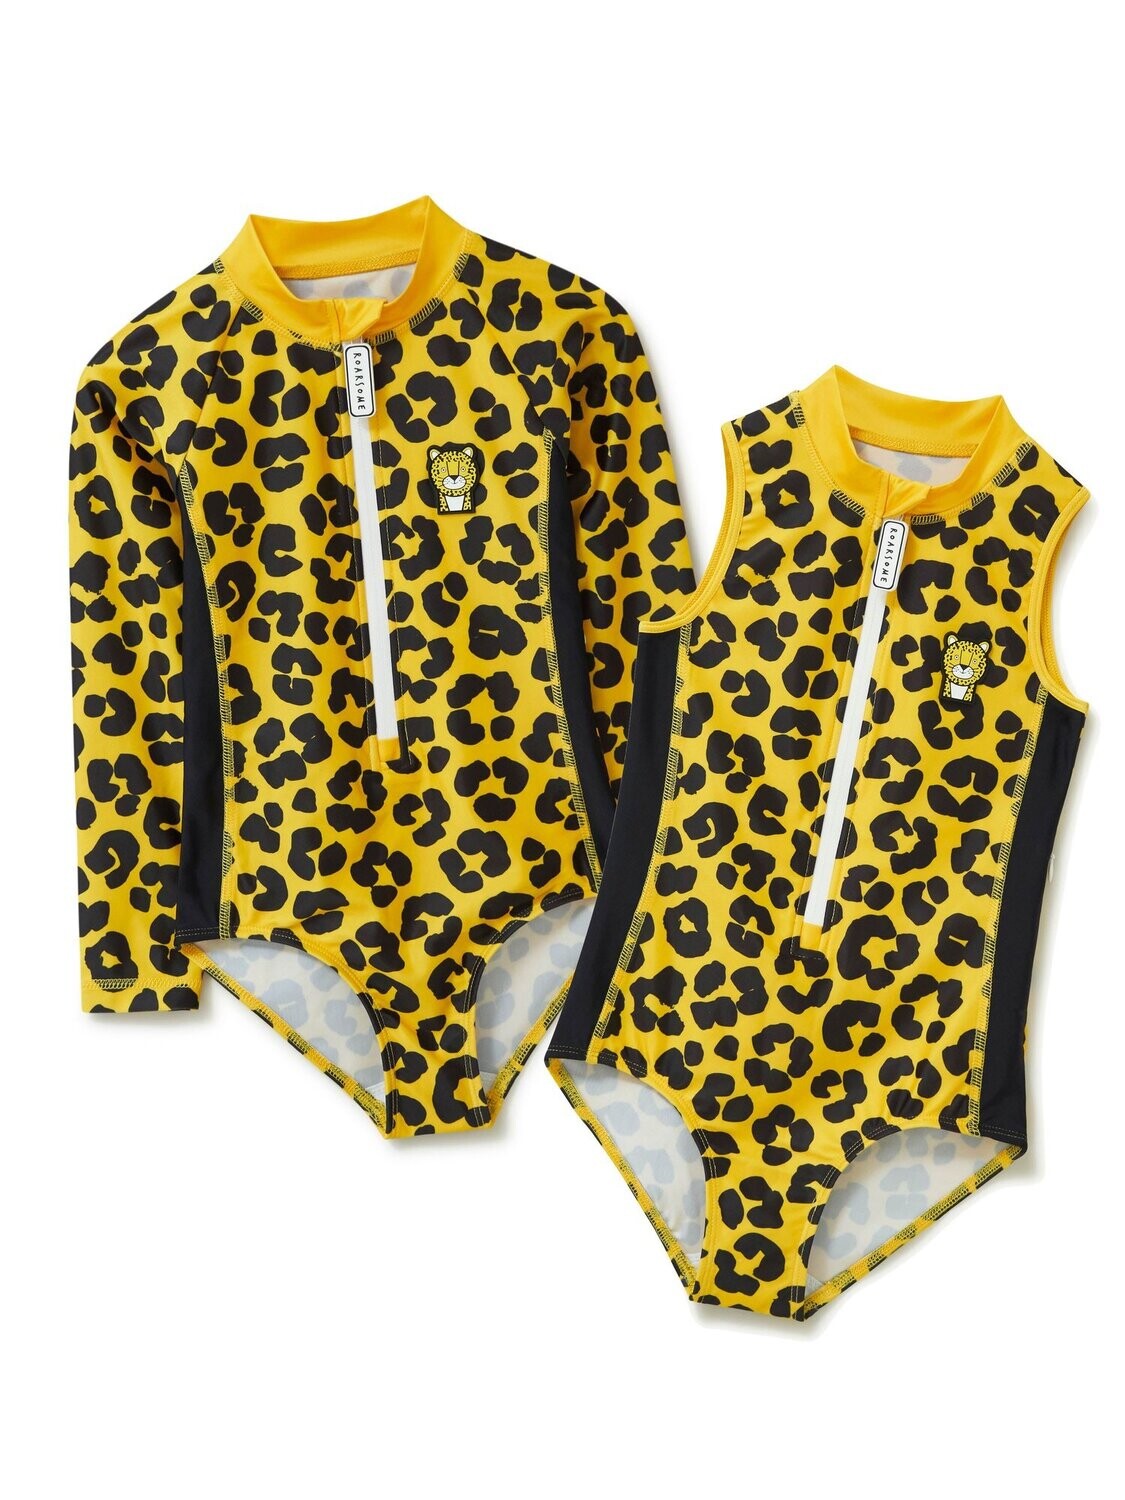 NEW Dash the Leopard - Swimsuit for Girls, Age: 1-2 yrs